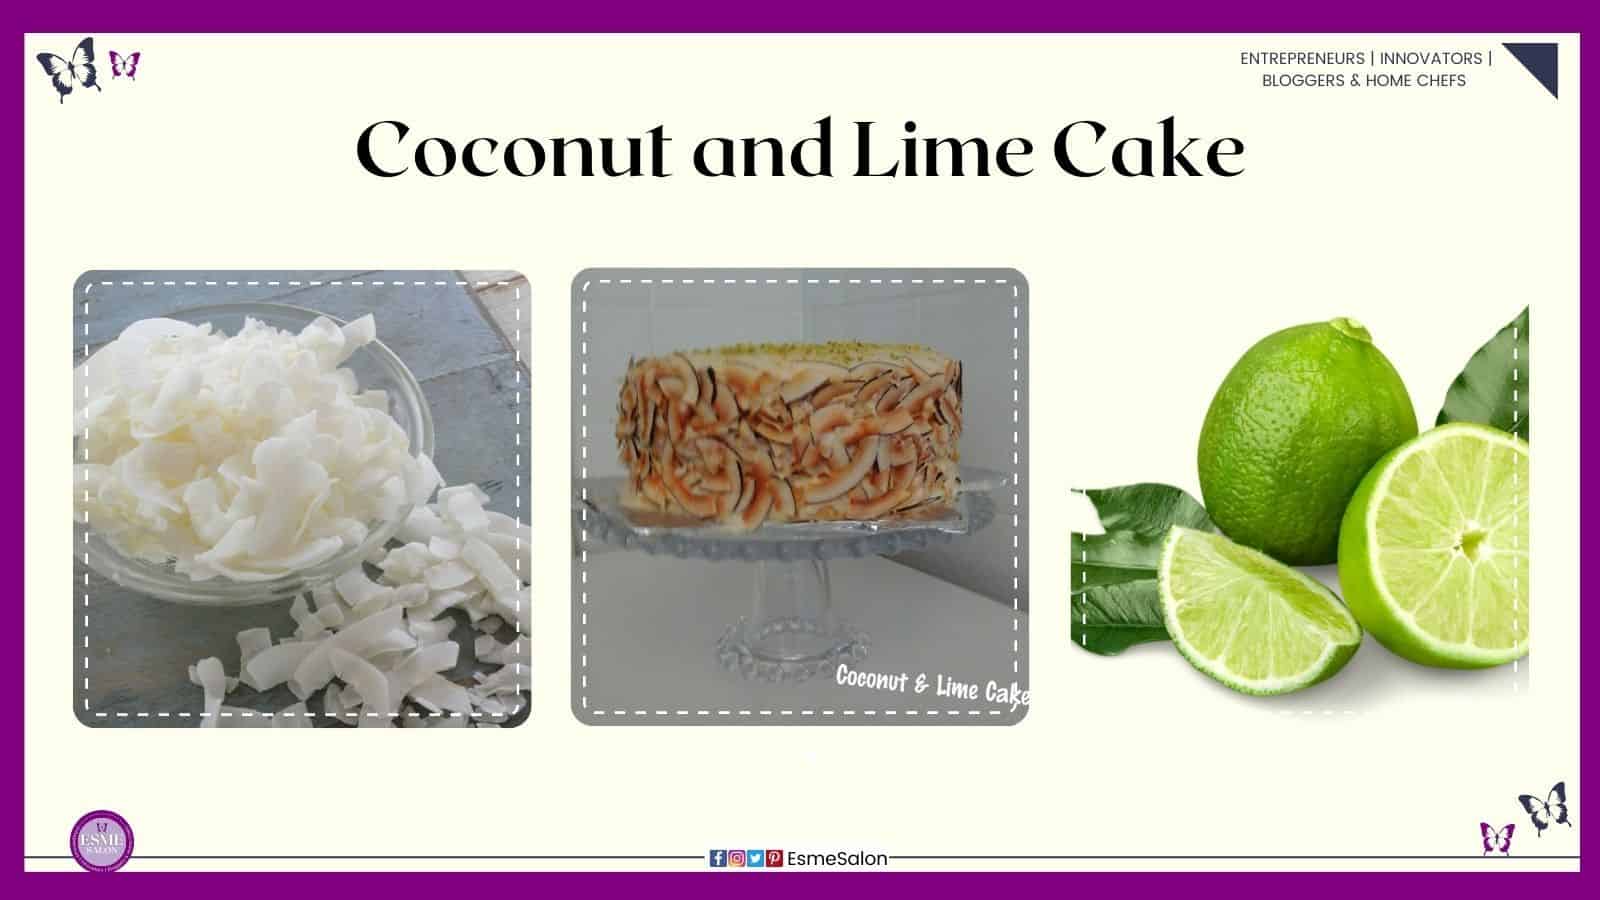 an image of a Coconut and Lime Cake with coconut slivers around the outside with grated lime on top on a cake stand